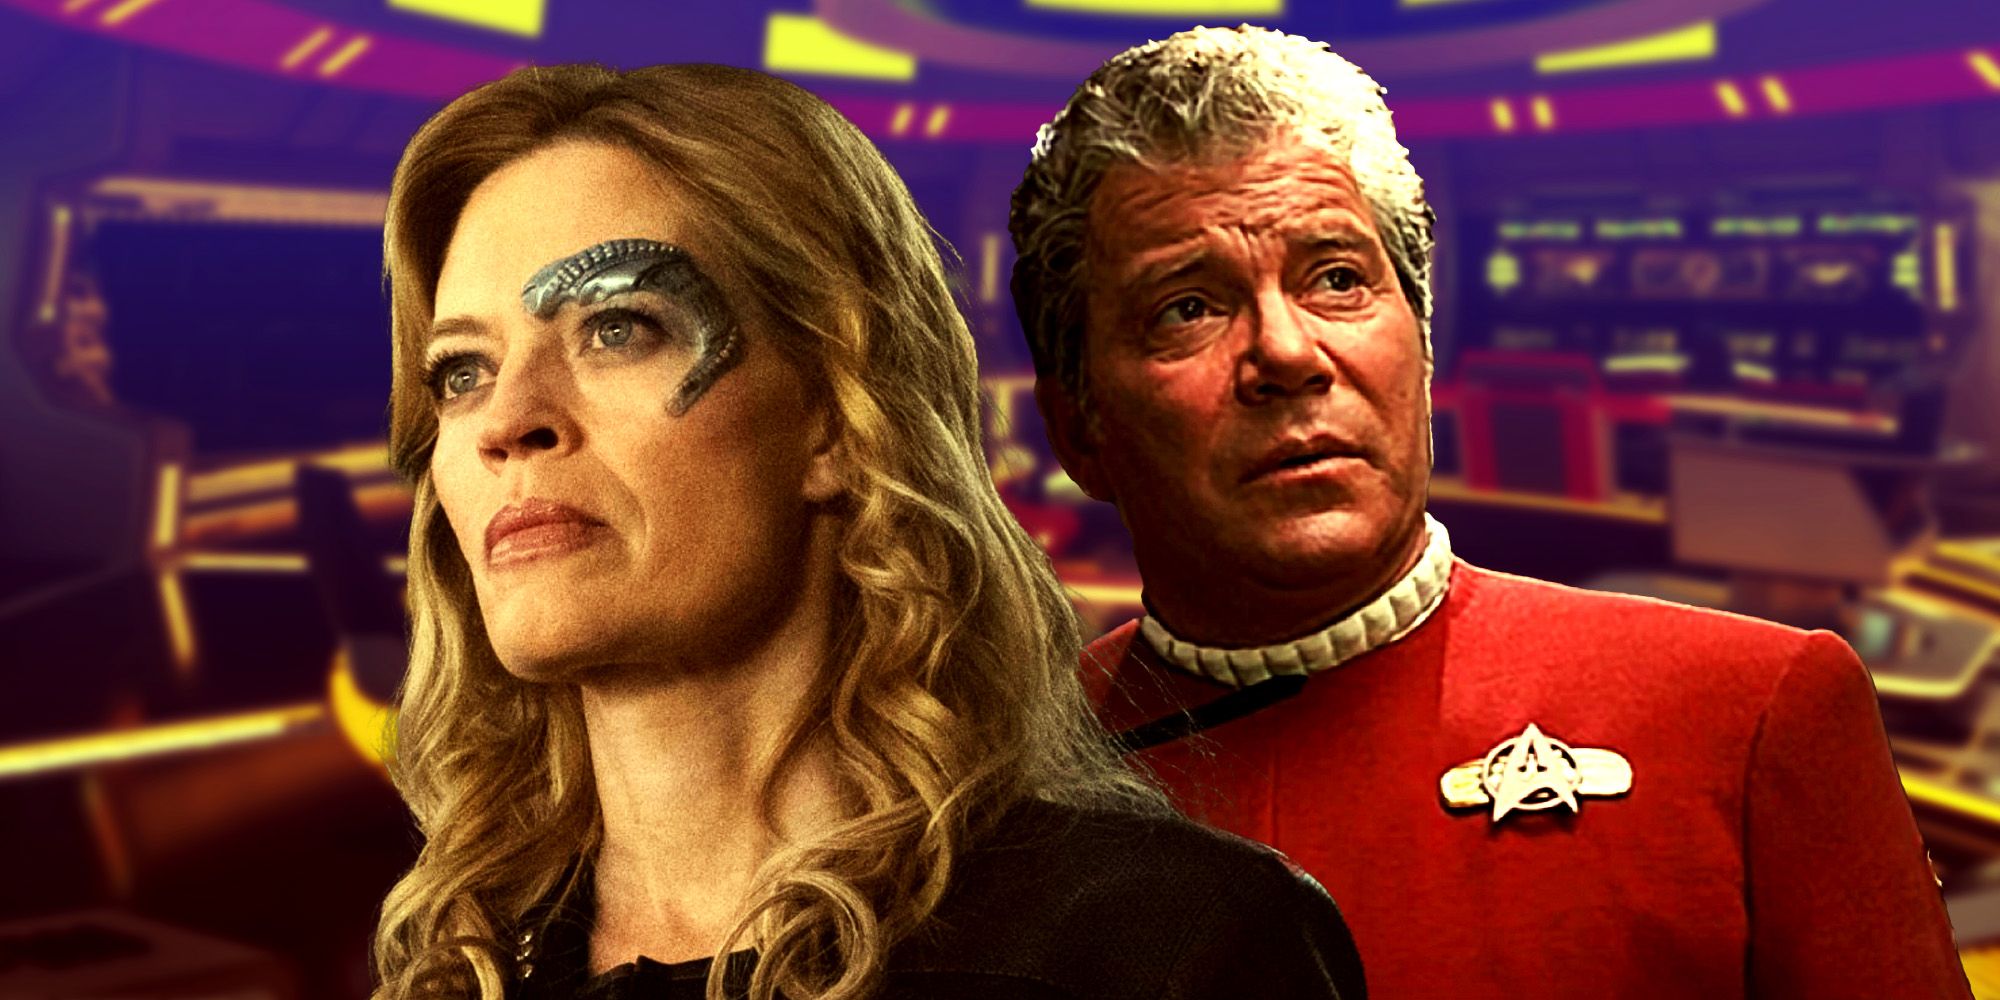 Star Trek: Legacy' What Is the 'Star Trek: Picard' Spinoff and Is